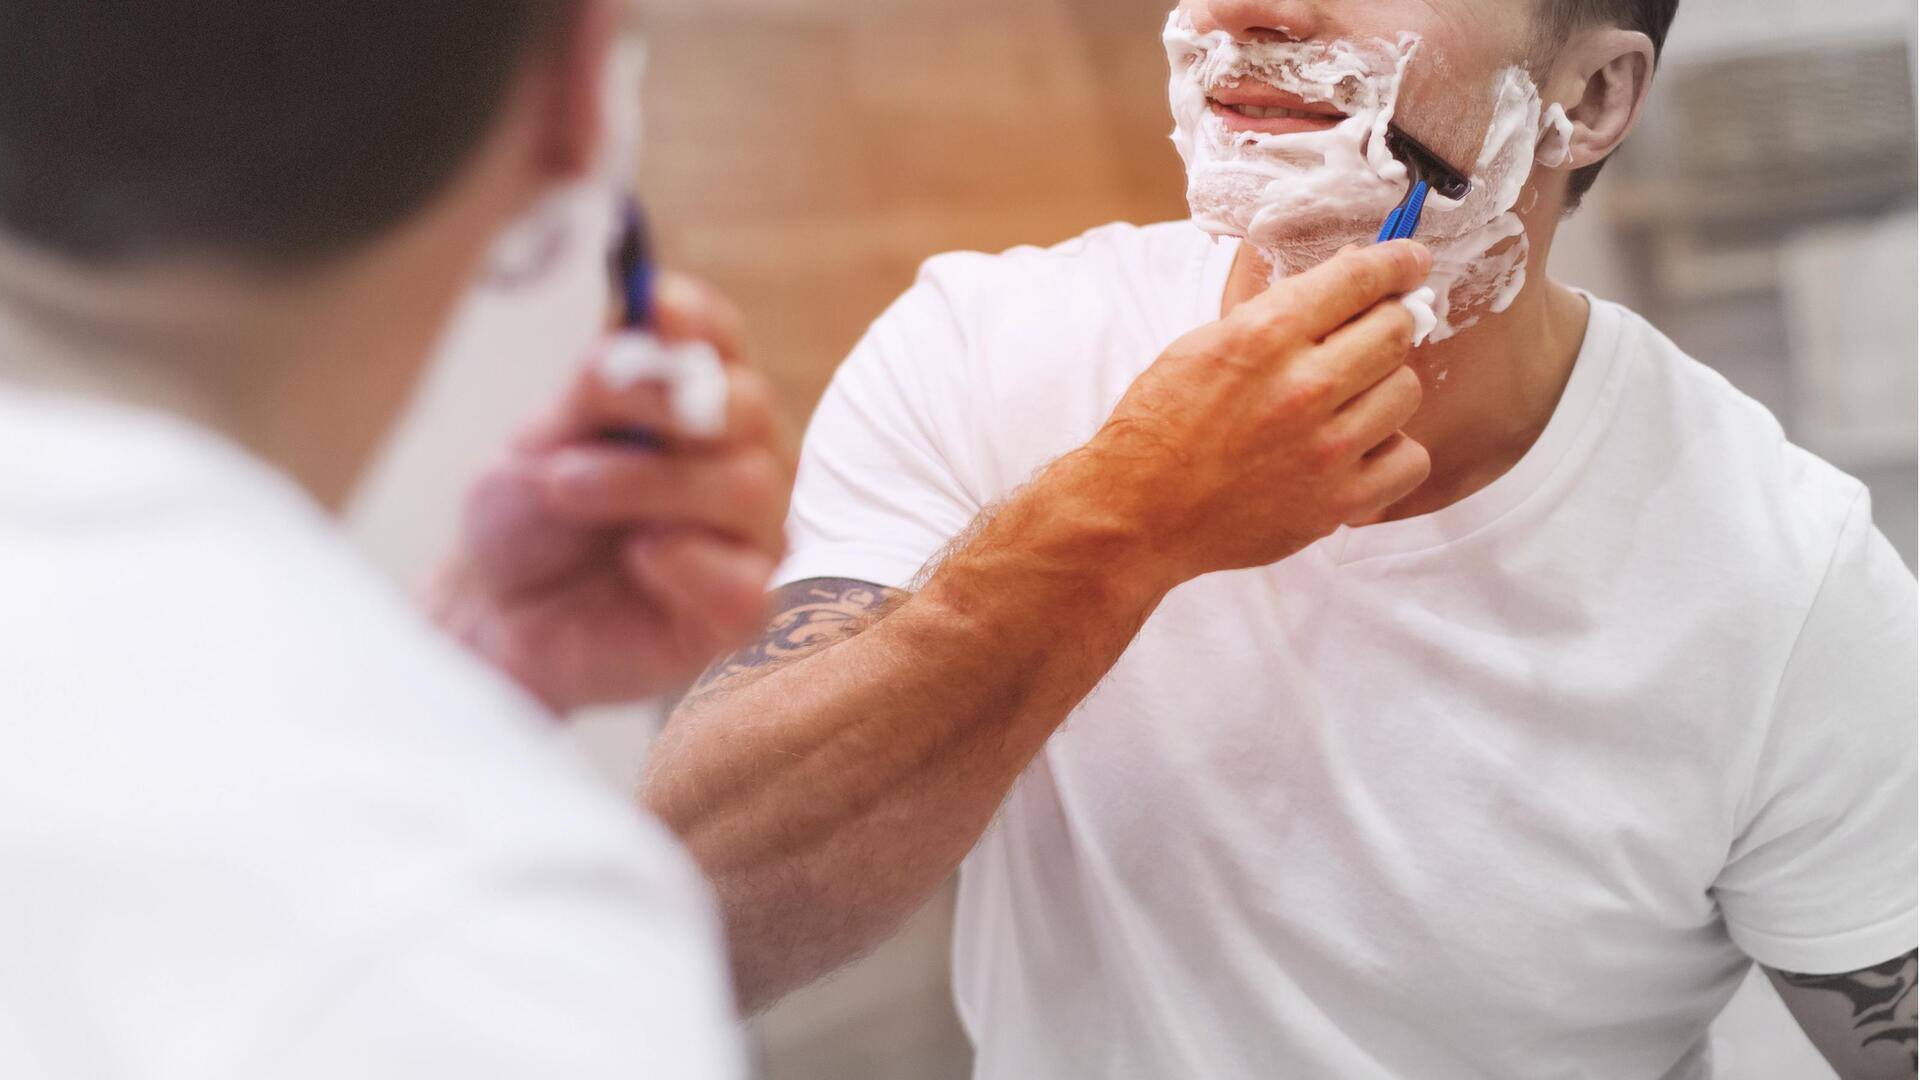 The modern man's guide to personal hygiene